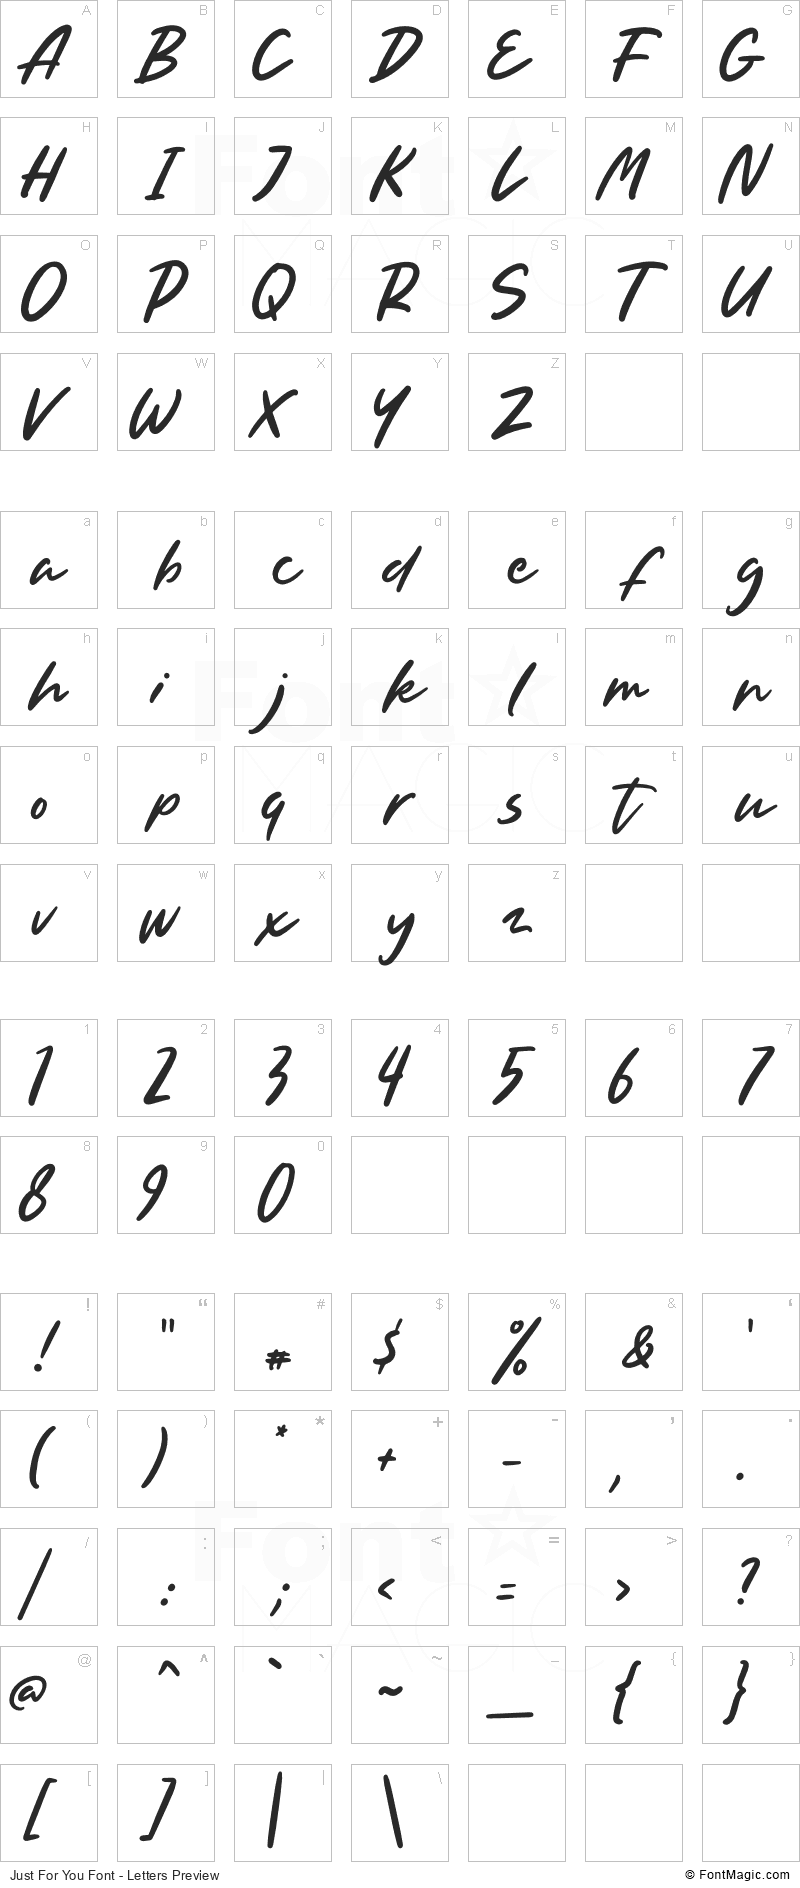 Just For You Font - All Latters Preview Chart